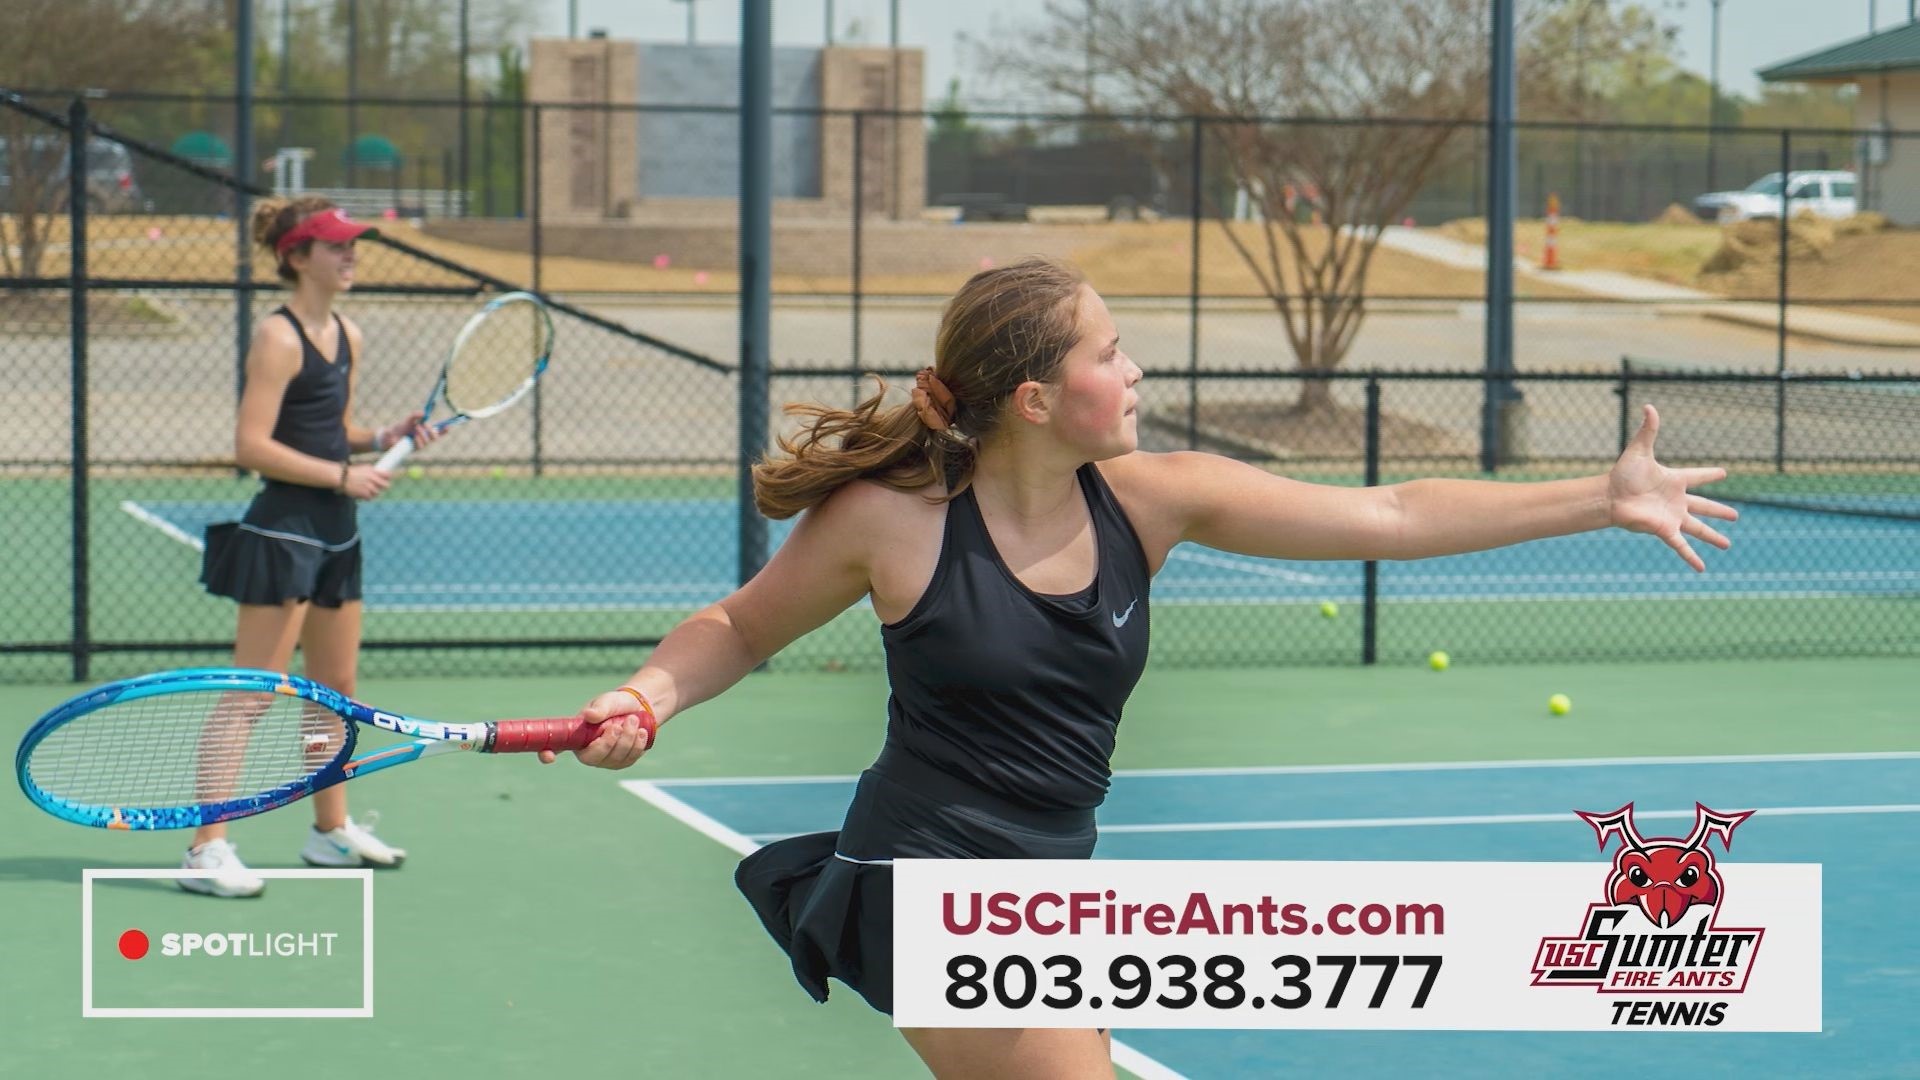 The USC Sumter Men’s and Women’s Tennis teams have qualified for the NJCAA Tennis Championships, which will take place later this spring.